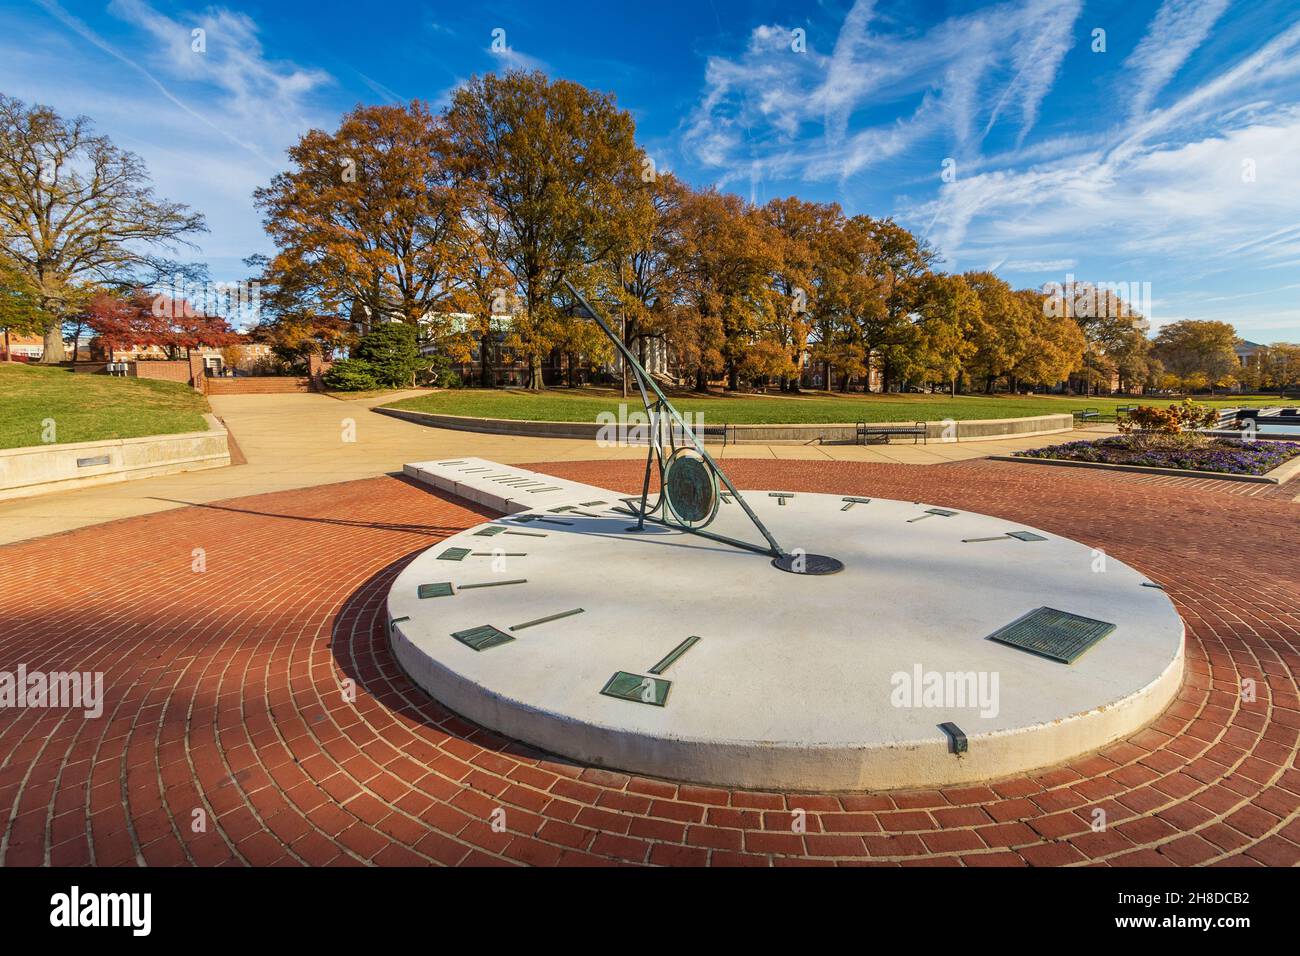 COLLEGE PARK, MD, USA - NOVEMBER 20: McKeldin Mall on November 20, 2021 at the University of Maryland in College Park, Maryland. Stock Photo